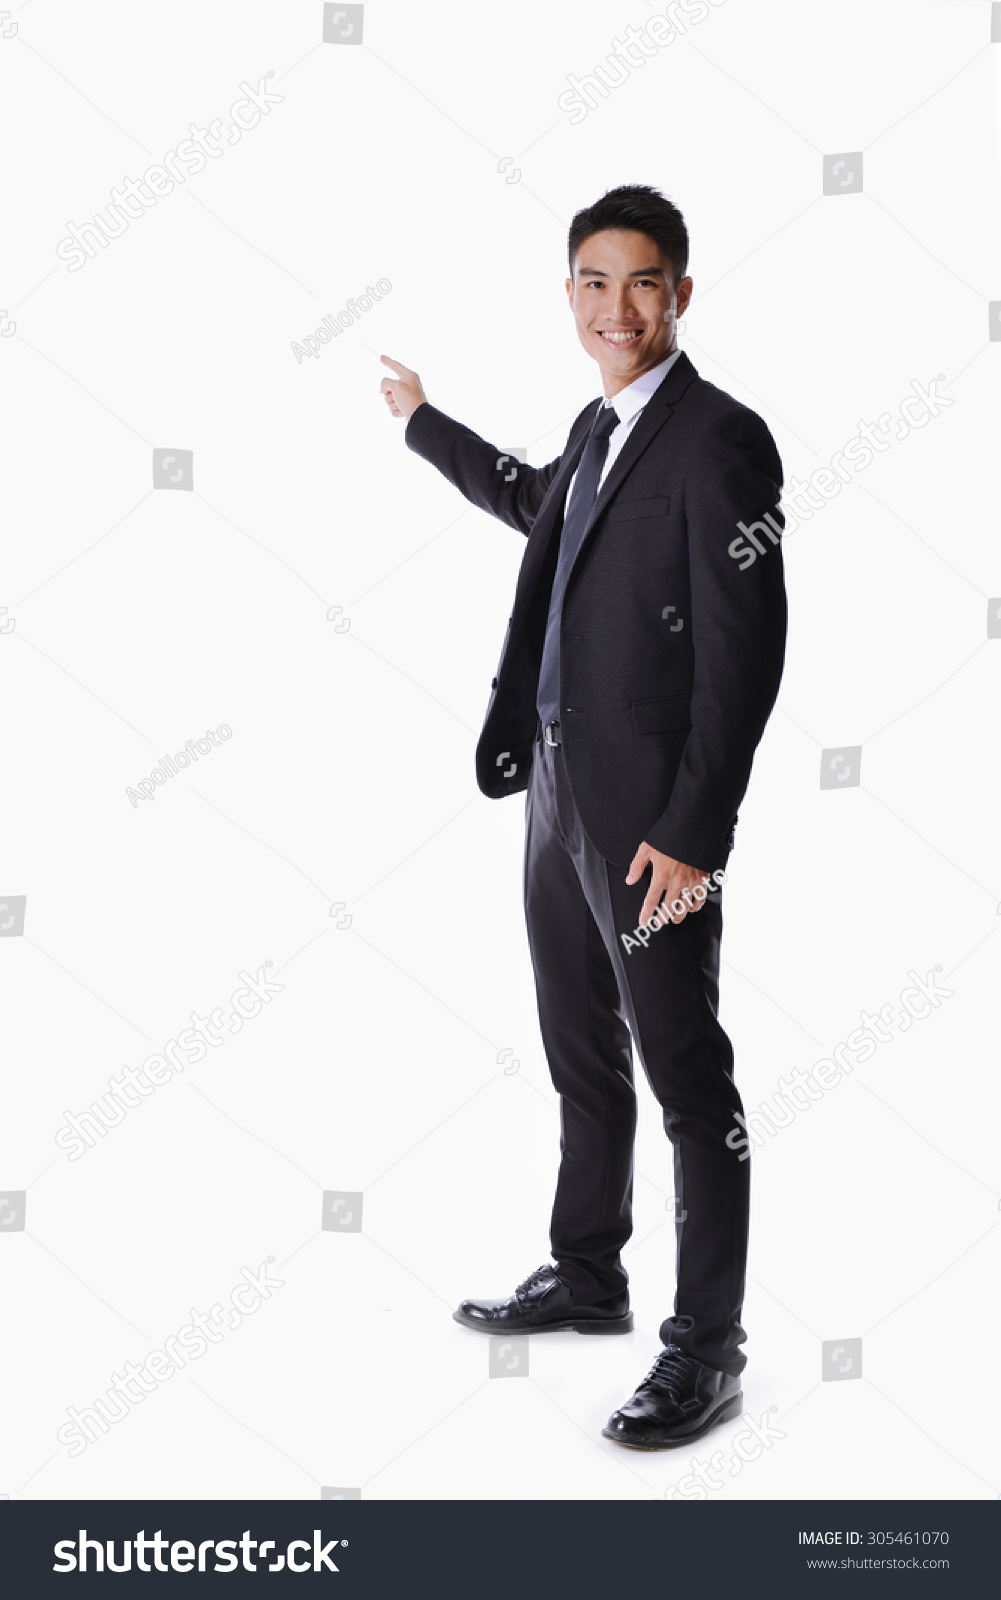 full body picture of a happy business man presenting something on a white background #305461070